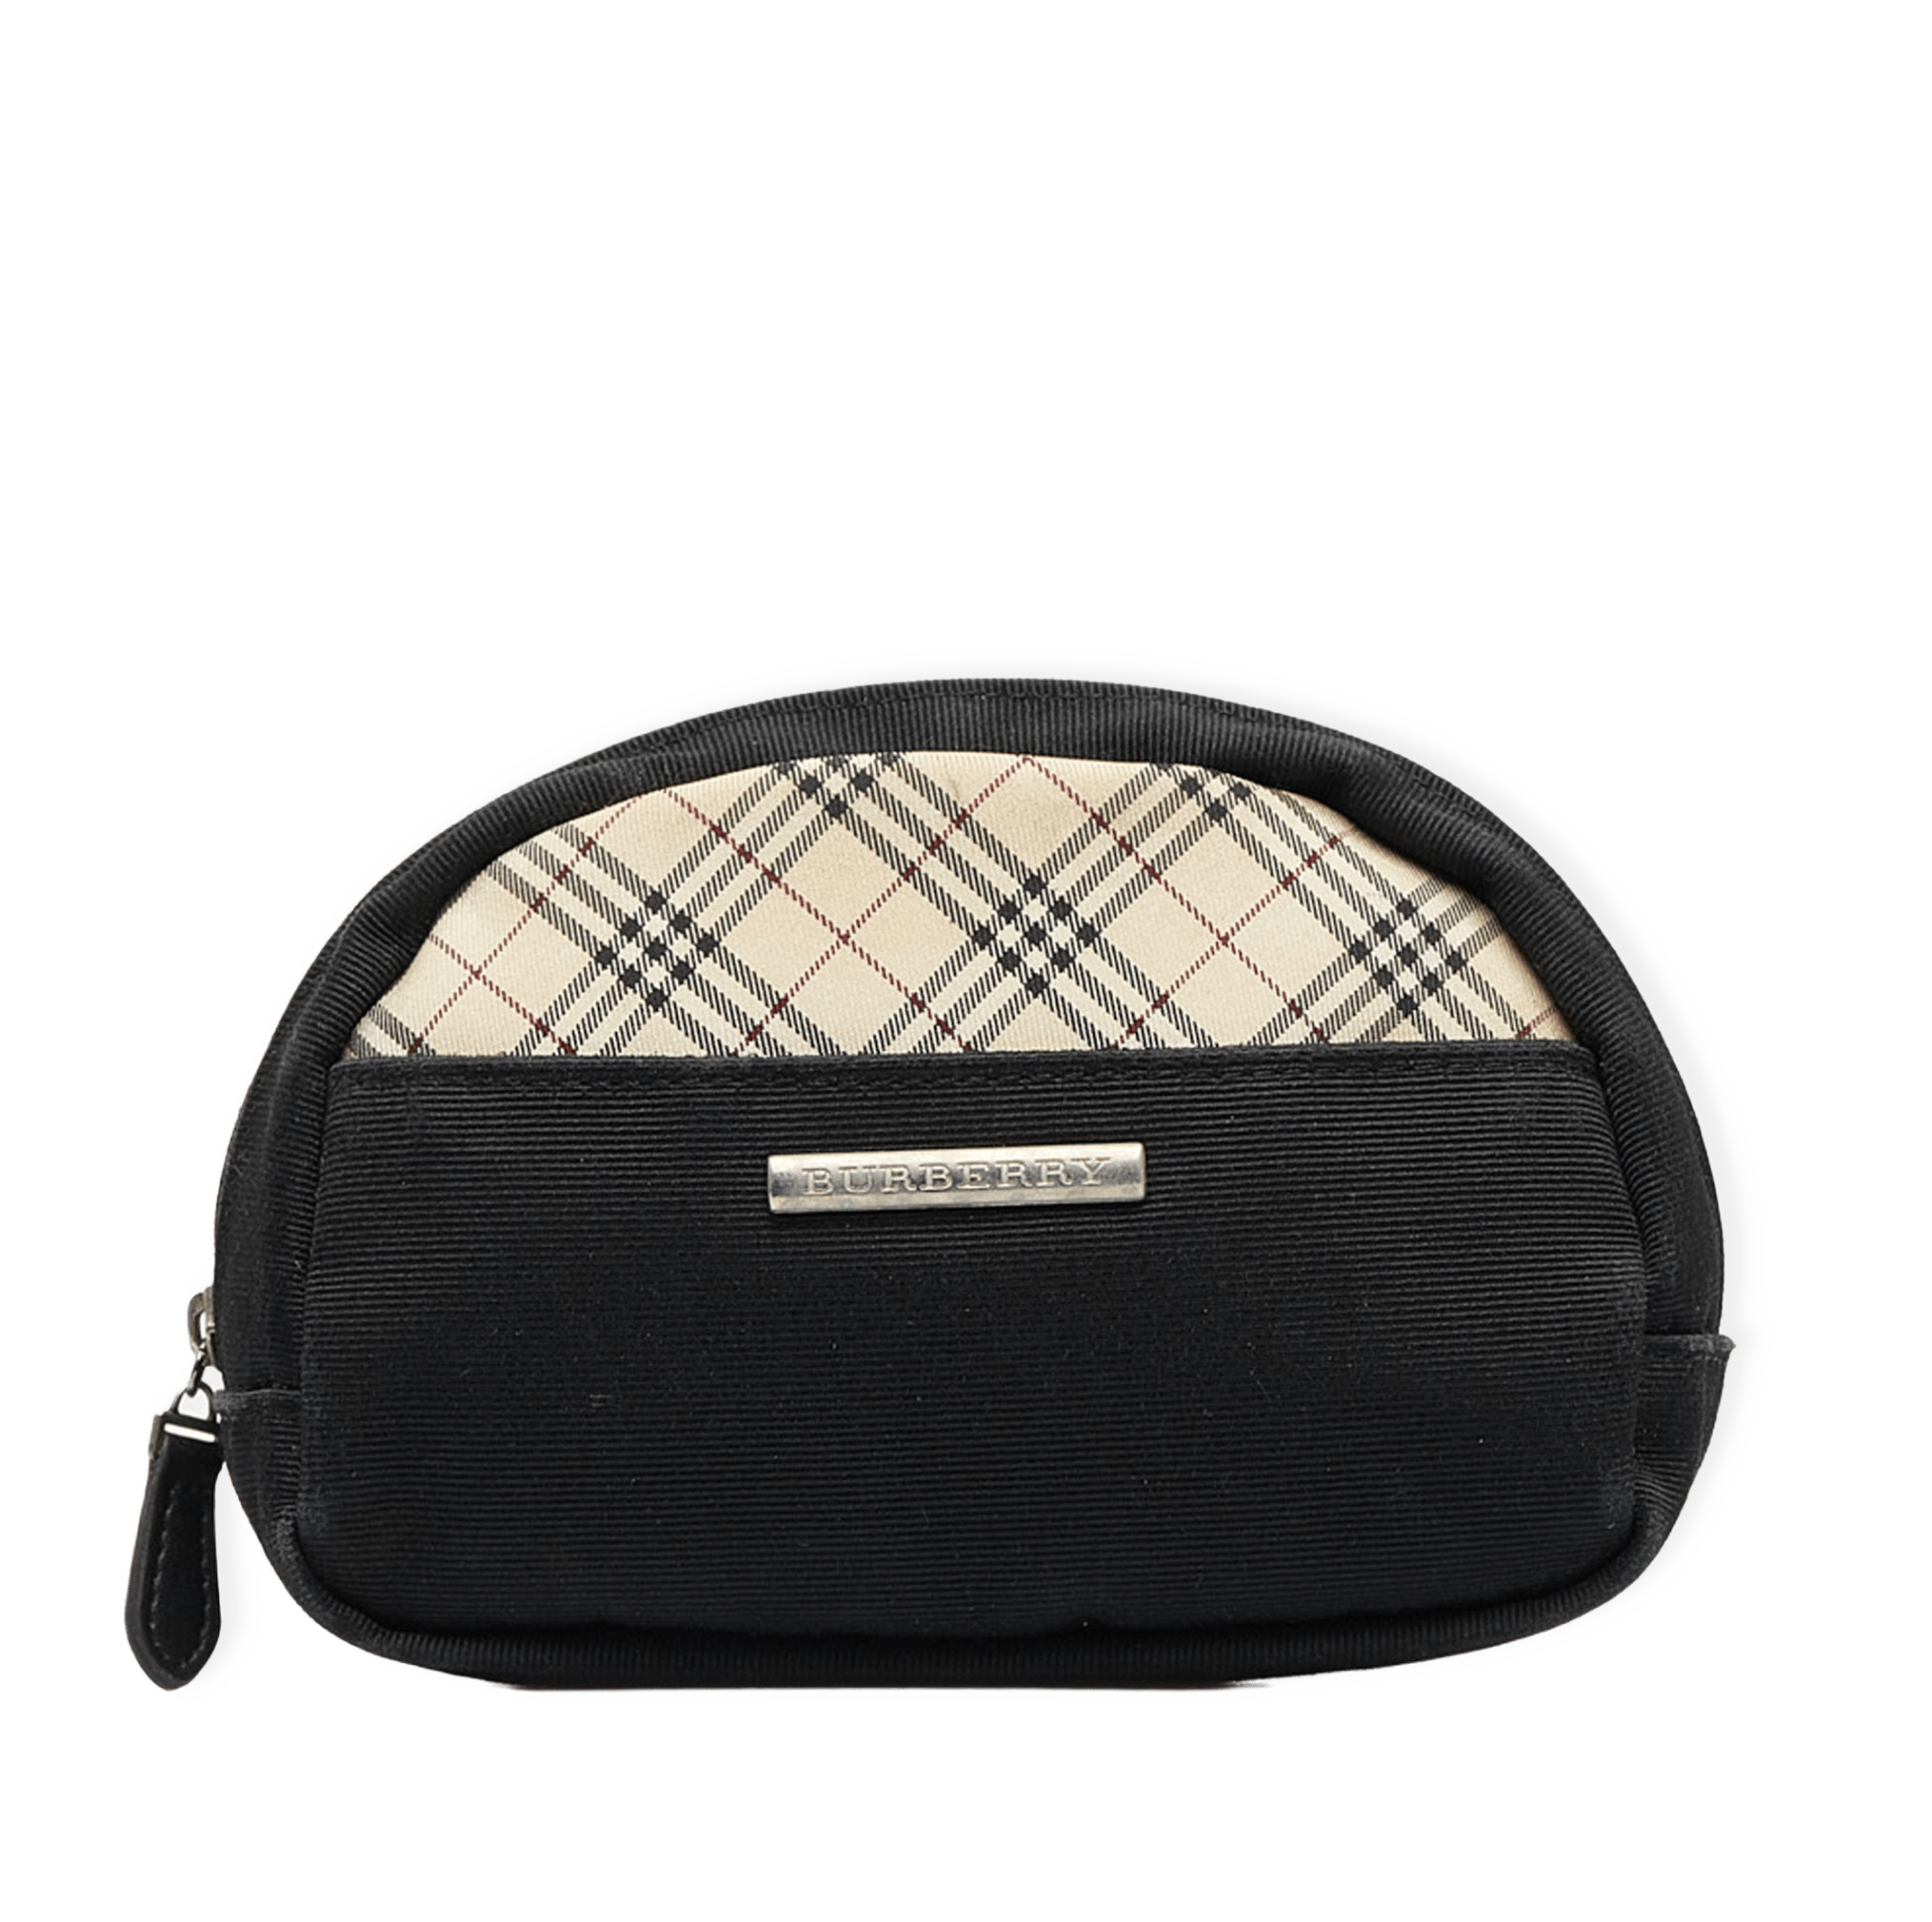 Burberry Canvas Pouch från Luxclusif